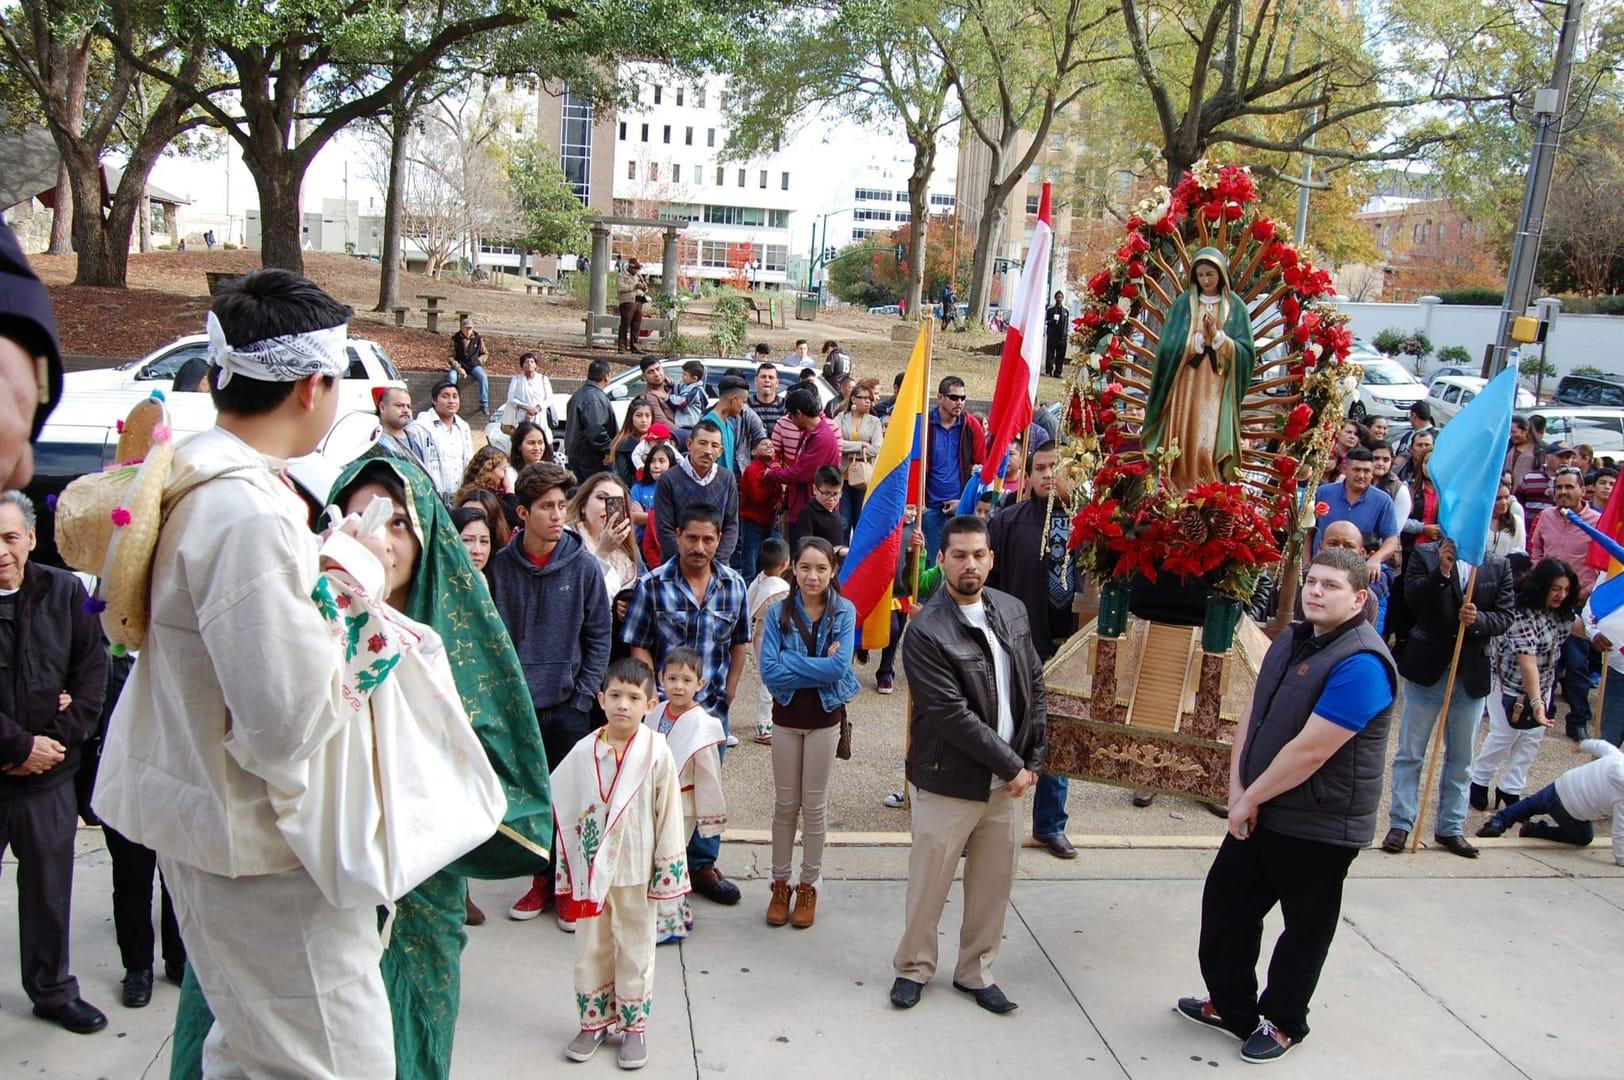 Study shows Guadalupe devotion lessens health issues caused by stress